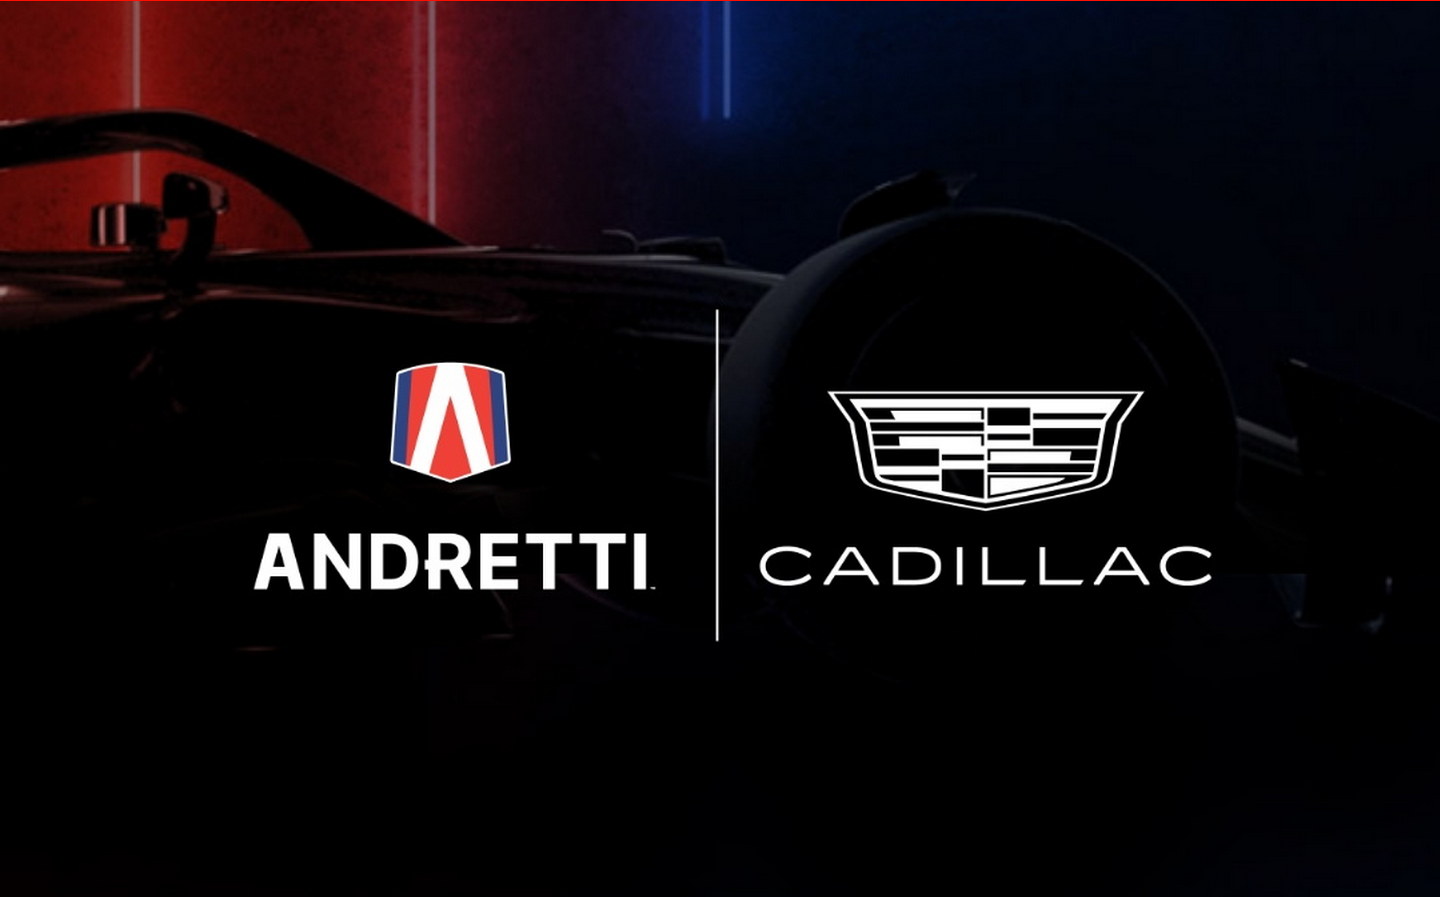 Cadillac and Andretti announce new Formula One partnership